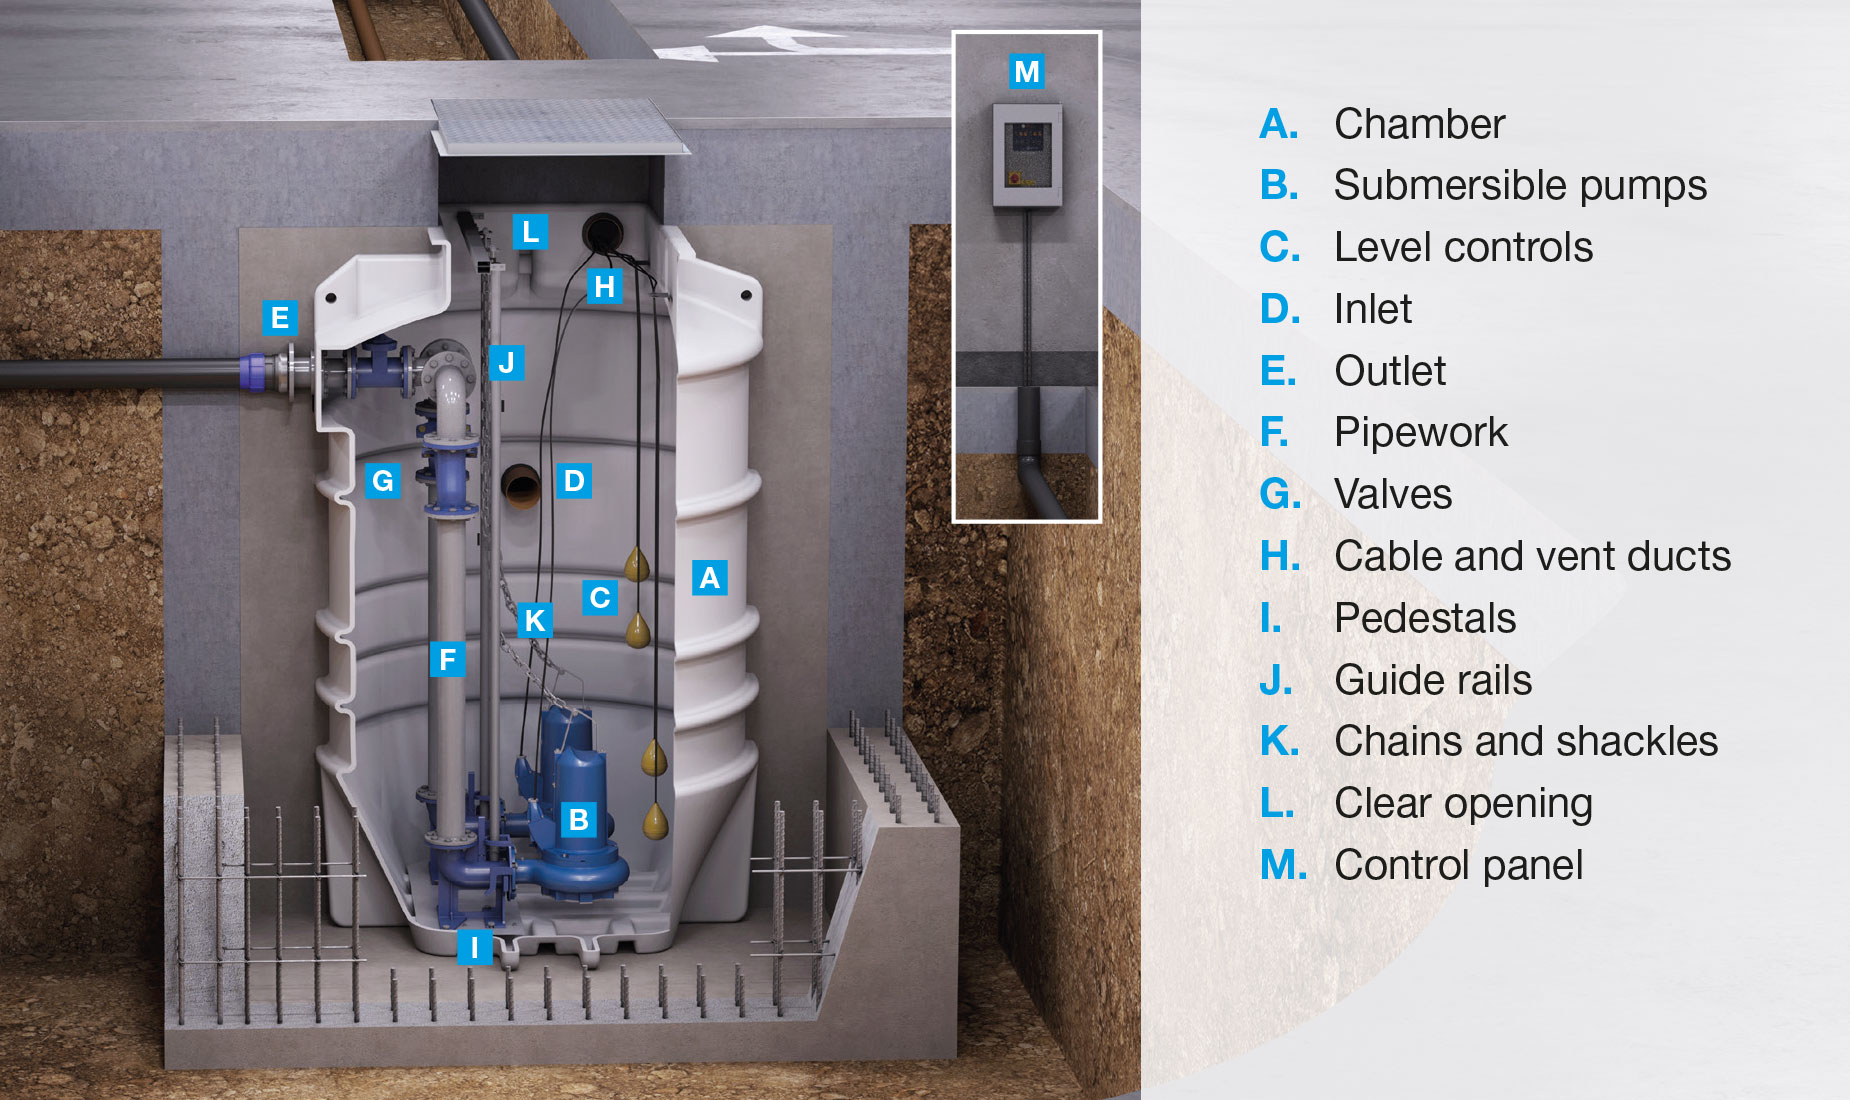 Anatomy of a below ground pumping station